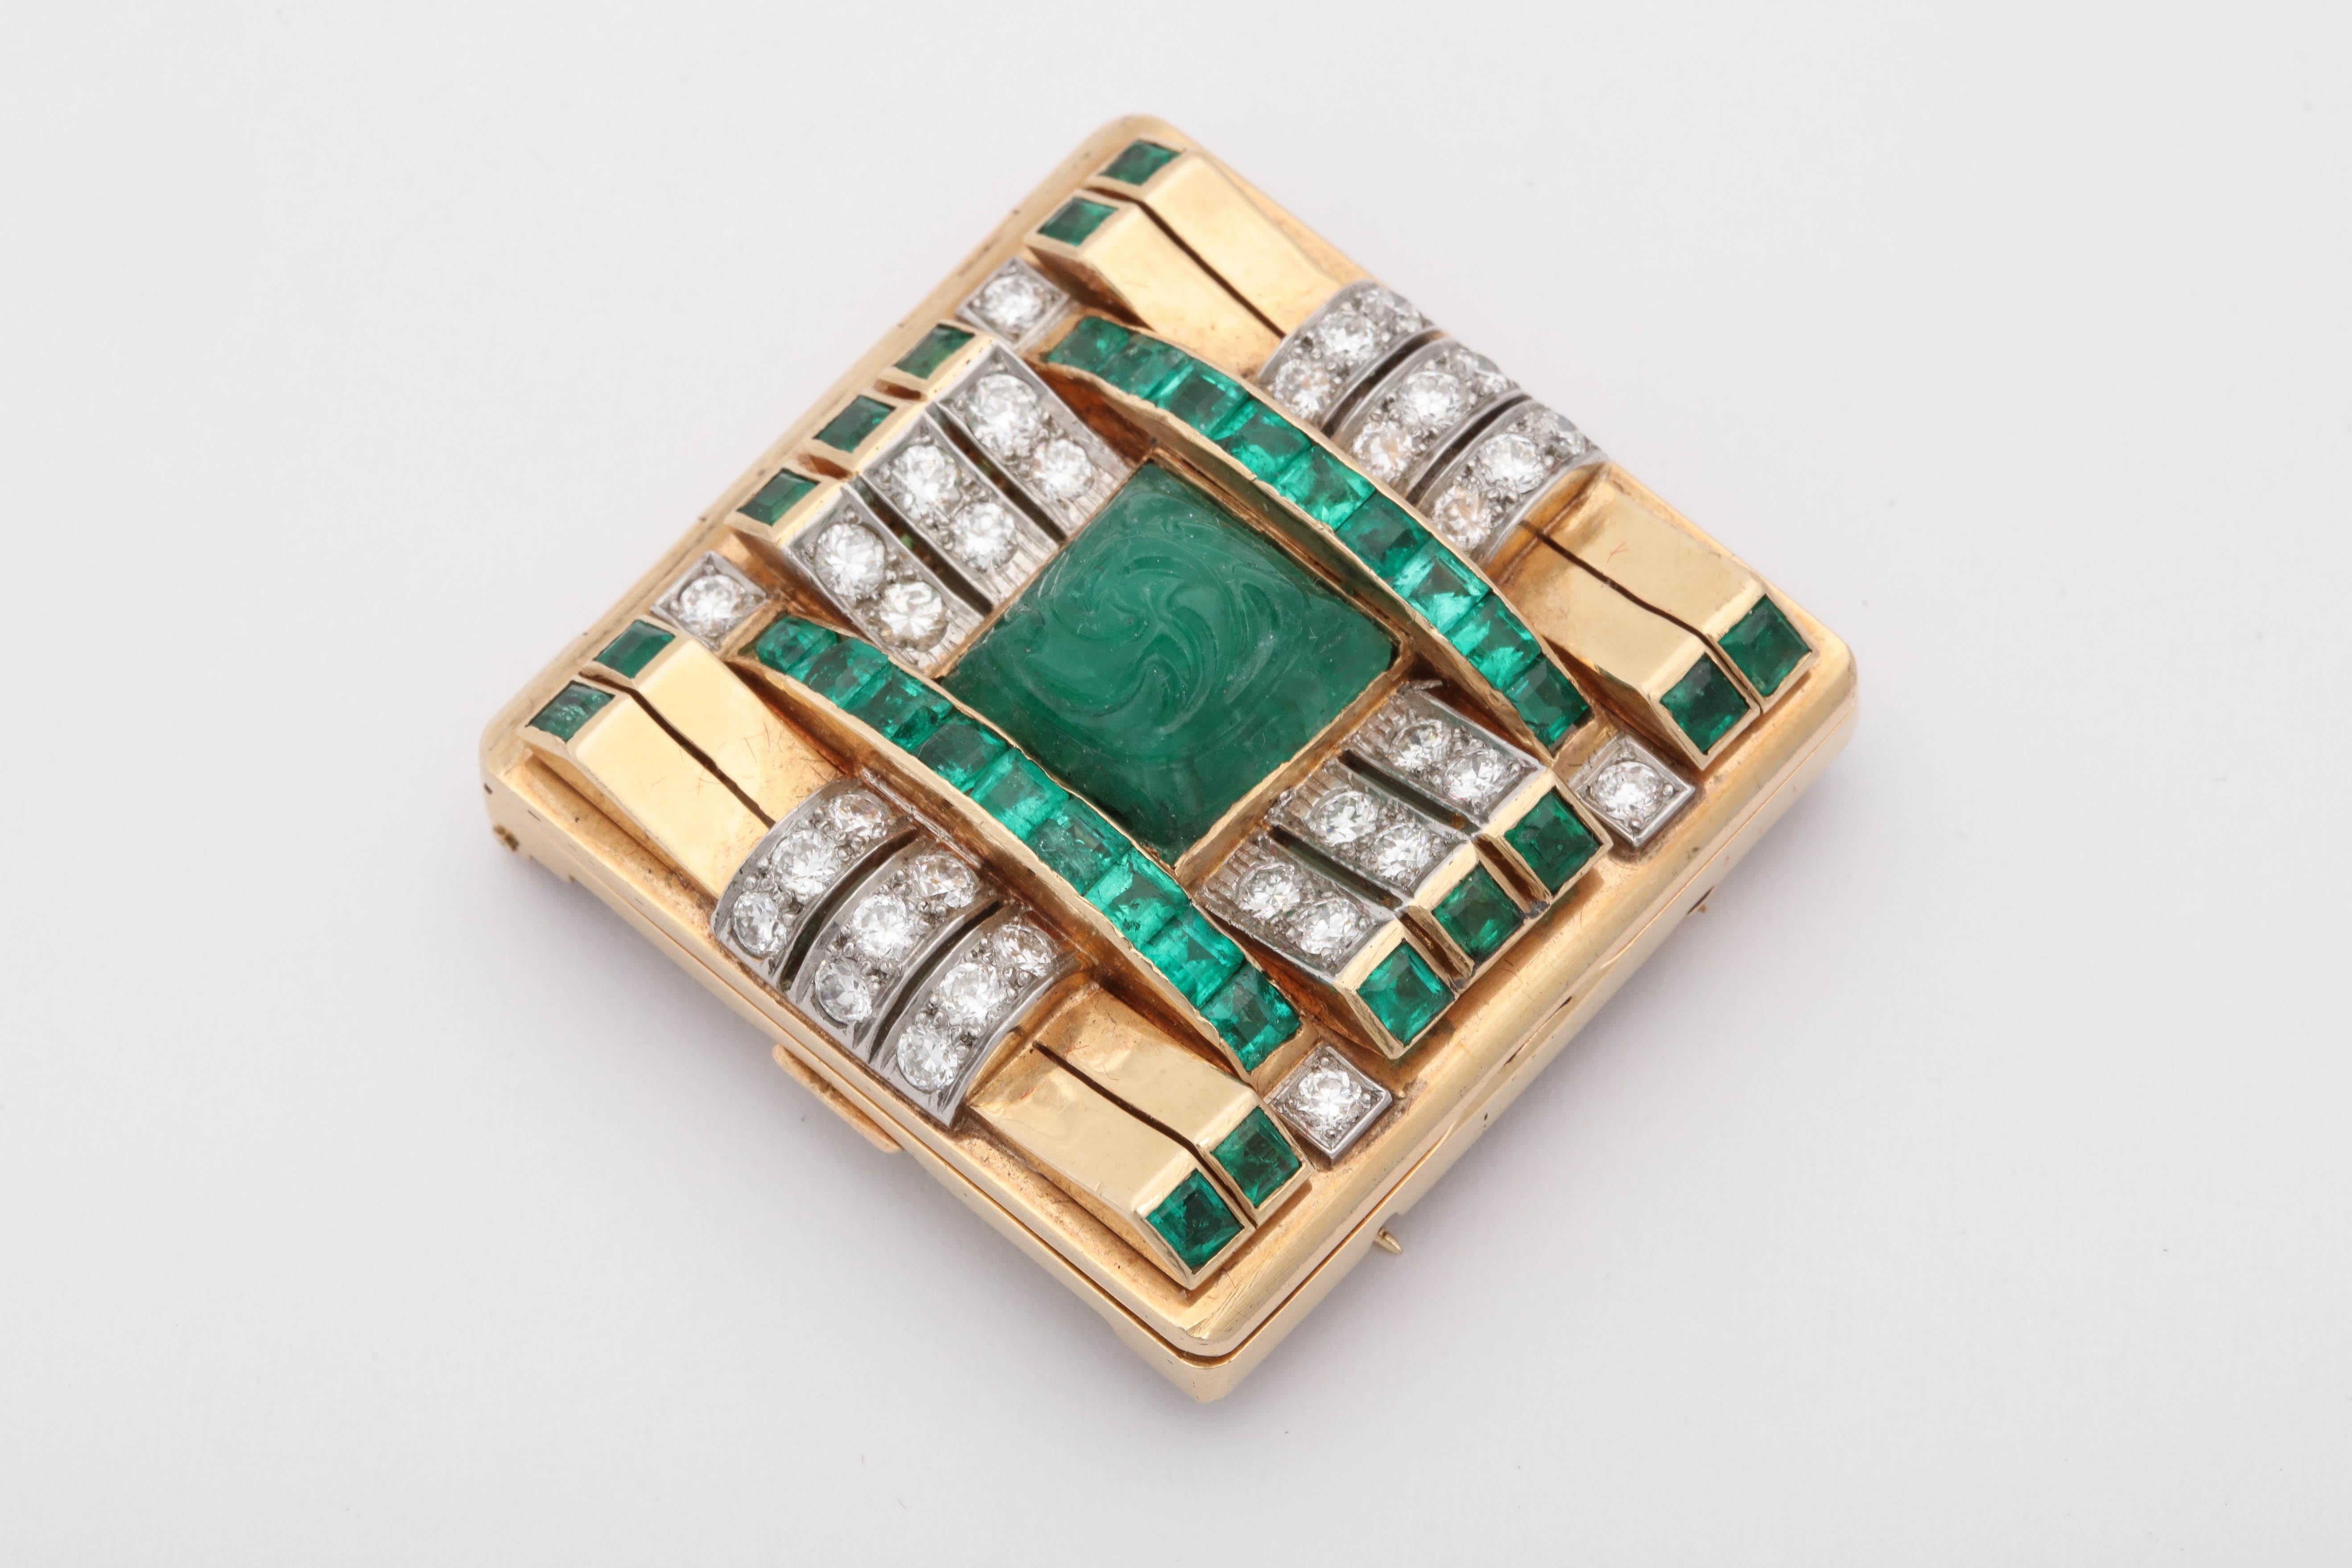 One Geometric Double Clip Brooch And Belt Buckle Unique Piece Of Jewelry Made Of 18kt Yellow Gold And Embellished With One Large Carved Beautiful Color Emerald Weighing Approximately 2 Carats. This Double Clip Brooch Is Also Designed With Numerous